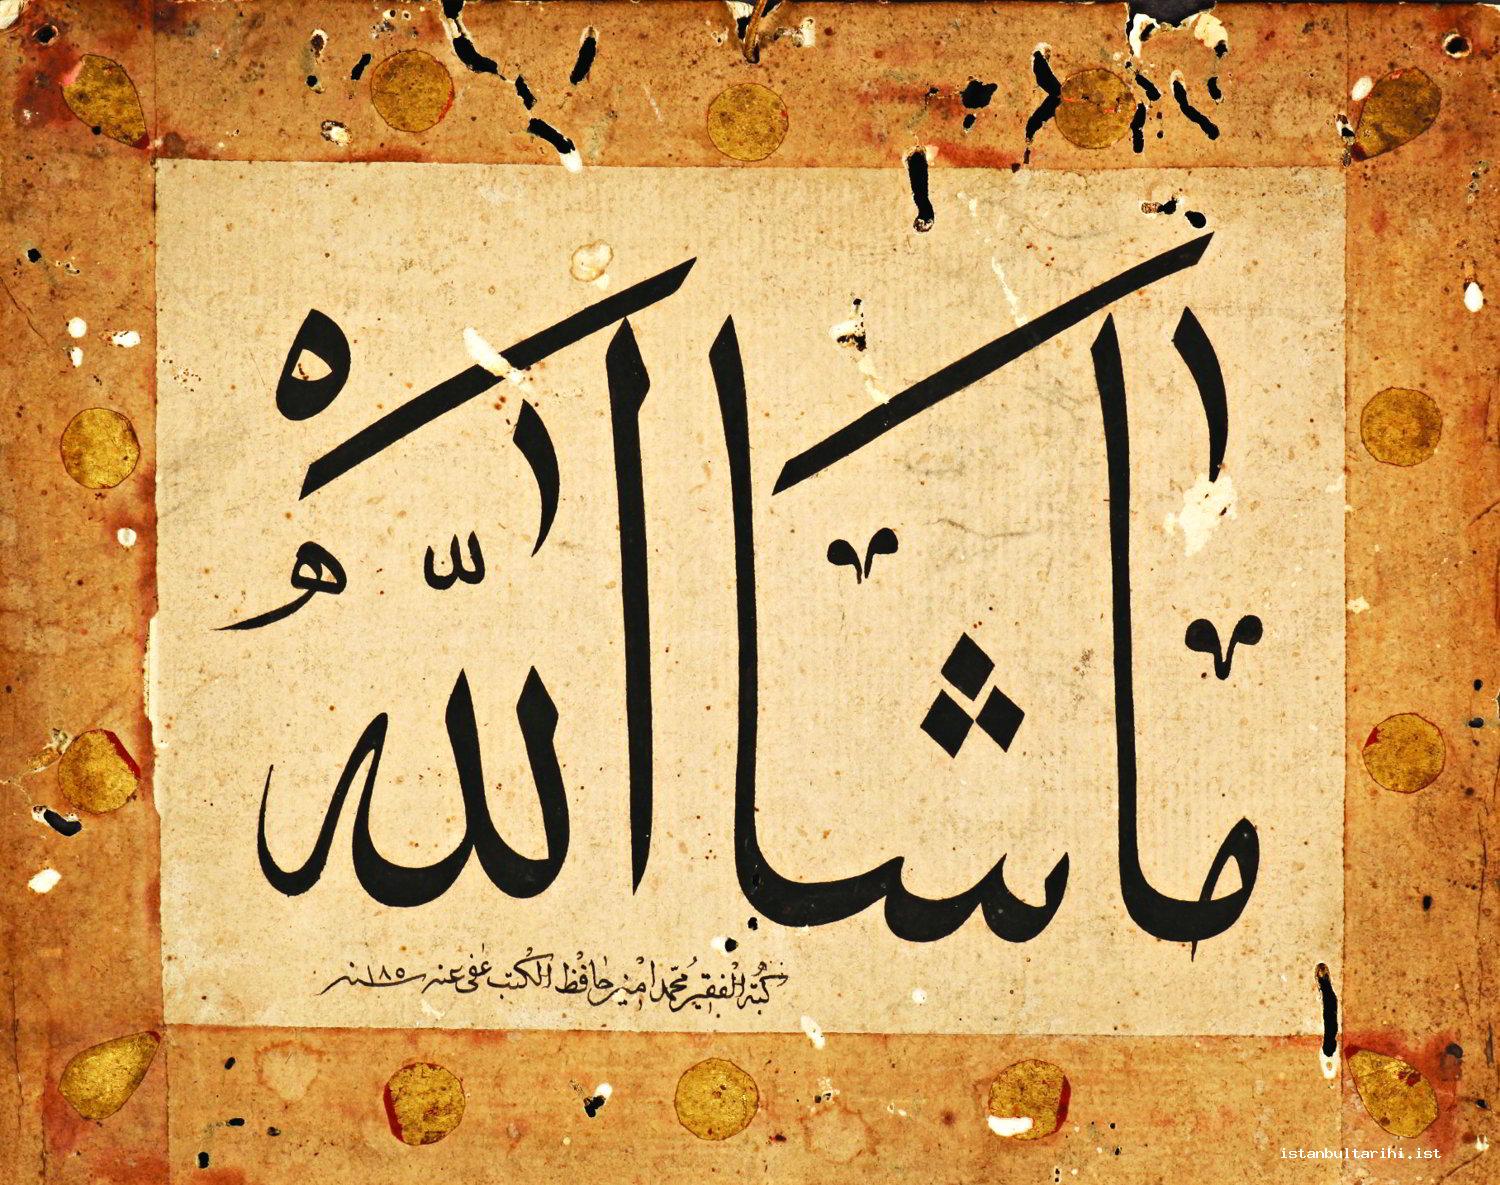 9c- A librarian’s (Mehmed Emin Efendi’s) invocations in his own calligraphy: Mashaallah